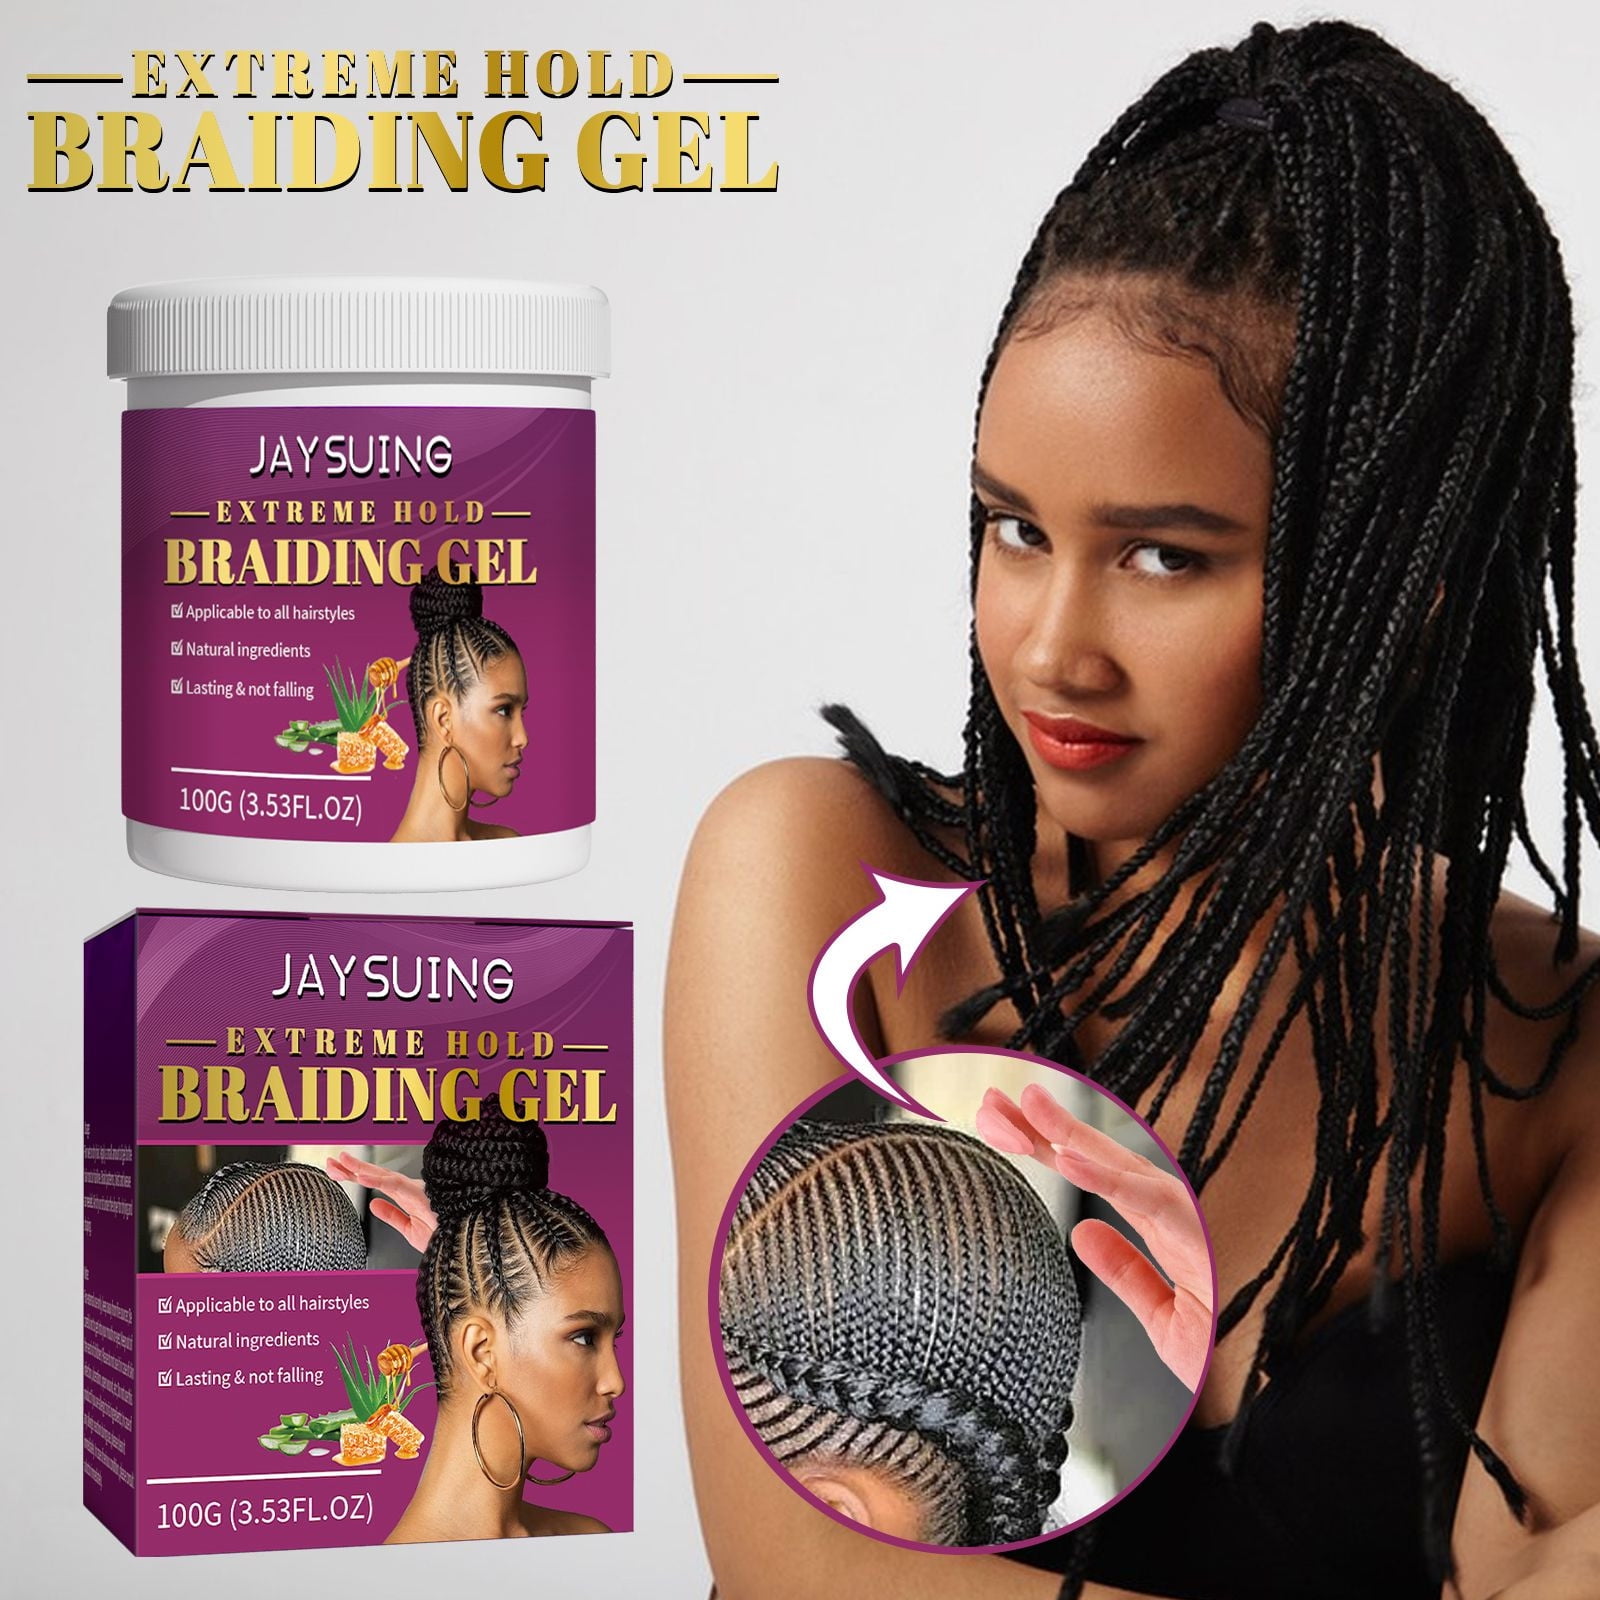 EJWQWQE HOLD BRAIDING GEL,Hair Braid Gel Maintains A Stunning Smell No  Flake Long Lasting, Natural Hair Product With Aloe And Beeswax For Black  Women 